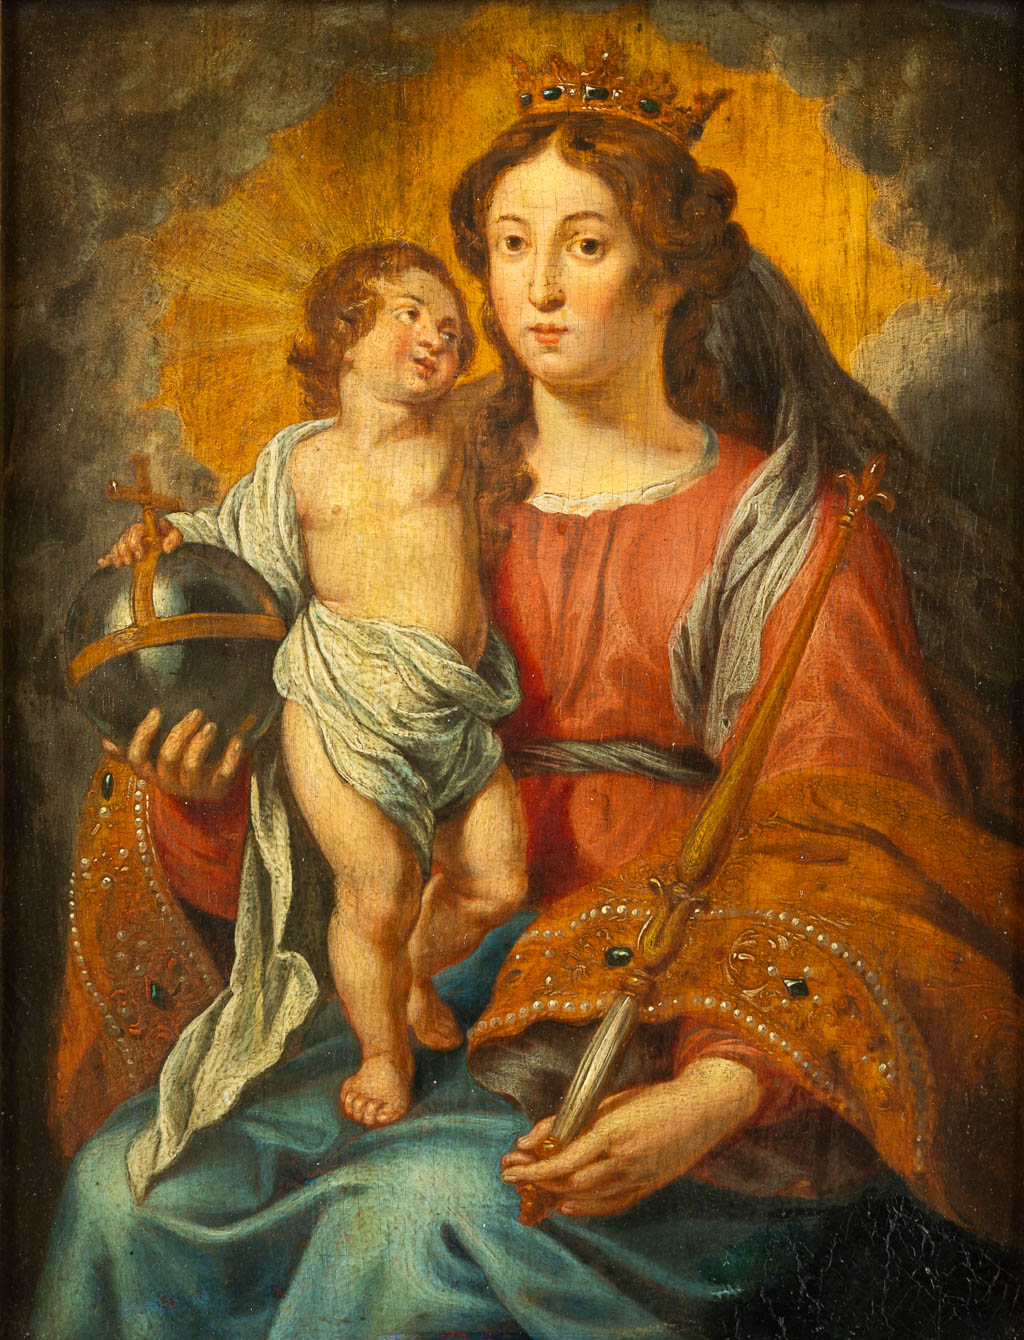  Flemish School, "Crowned Madonna with child, Scepter and Globus Cruciger", oil on panel, 17th C.